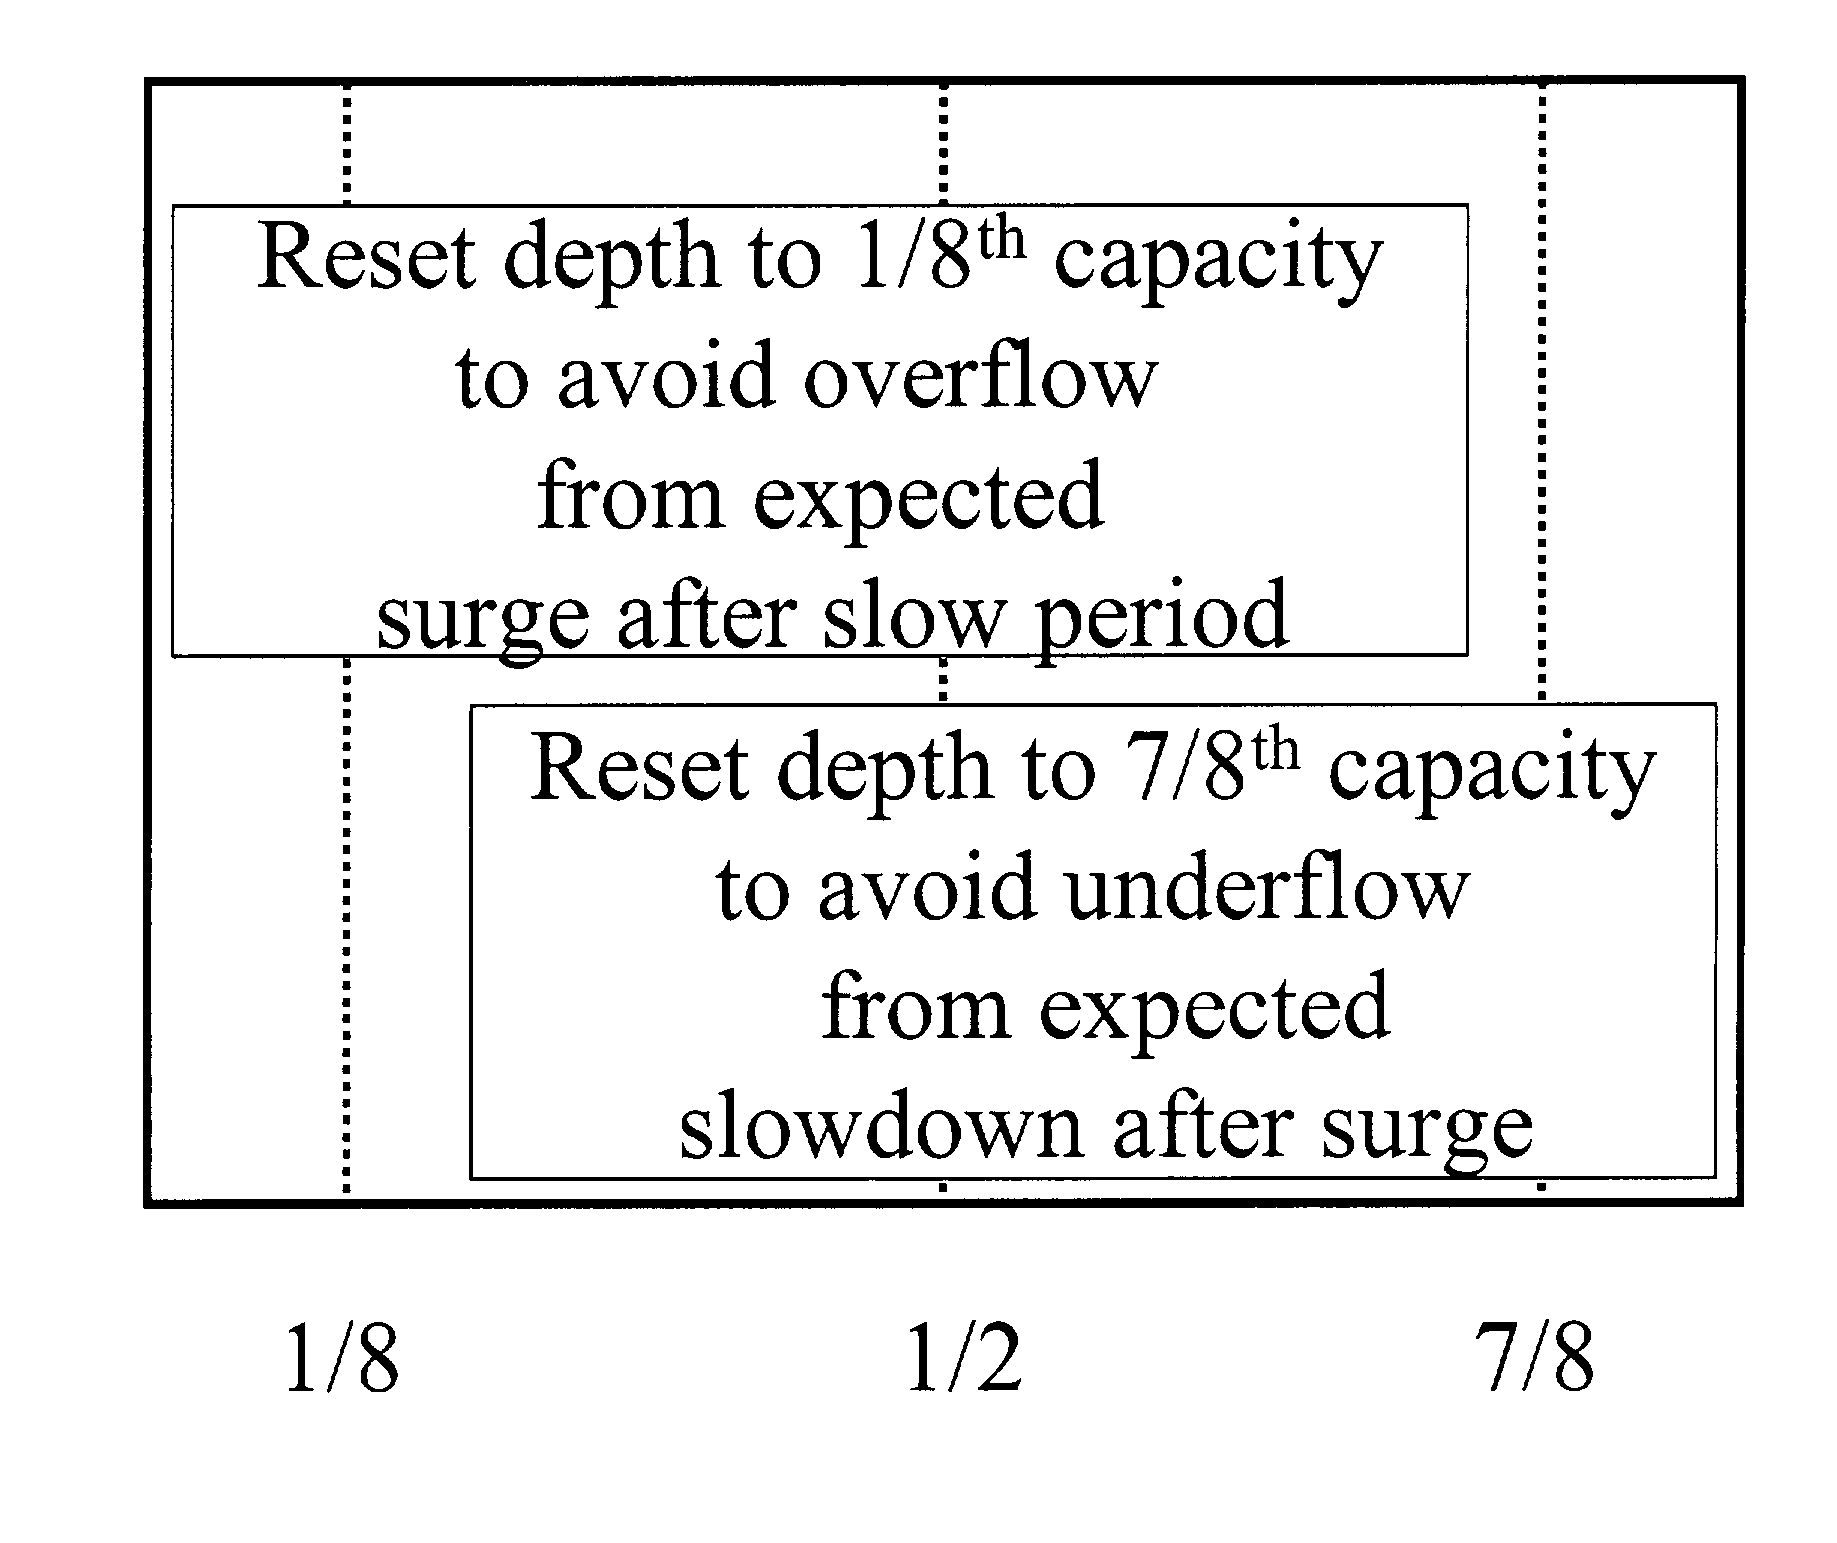 Automatic adjustment of buffer depth for the correction of packet delay variation